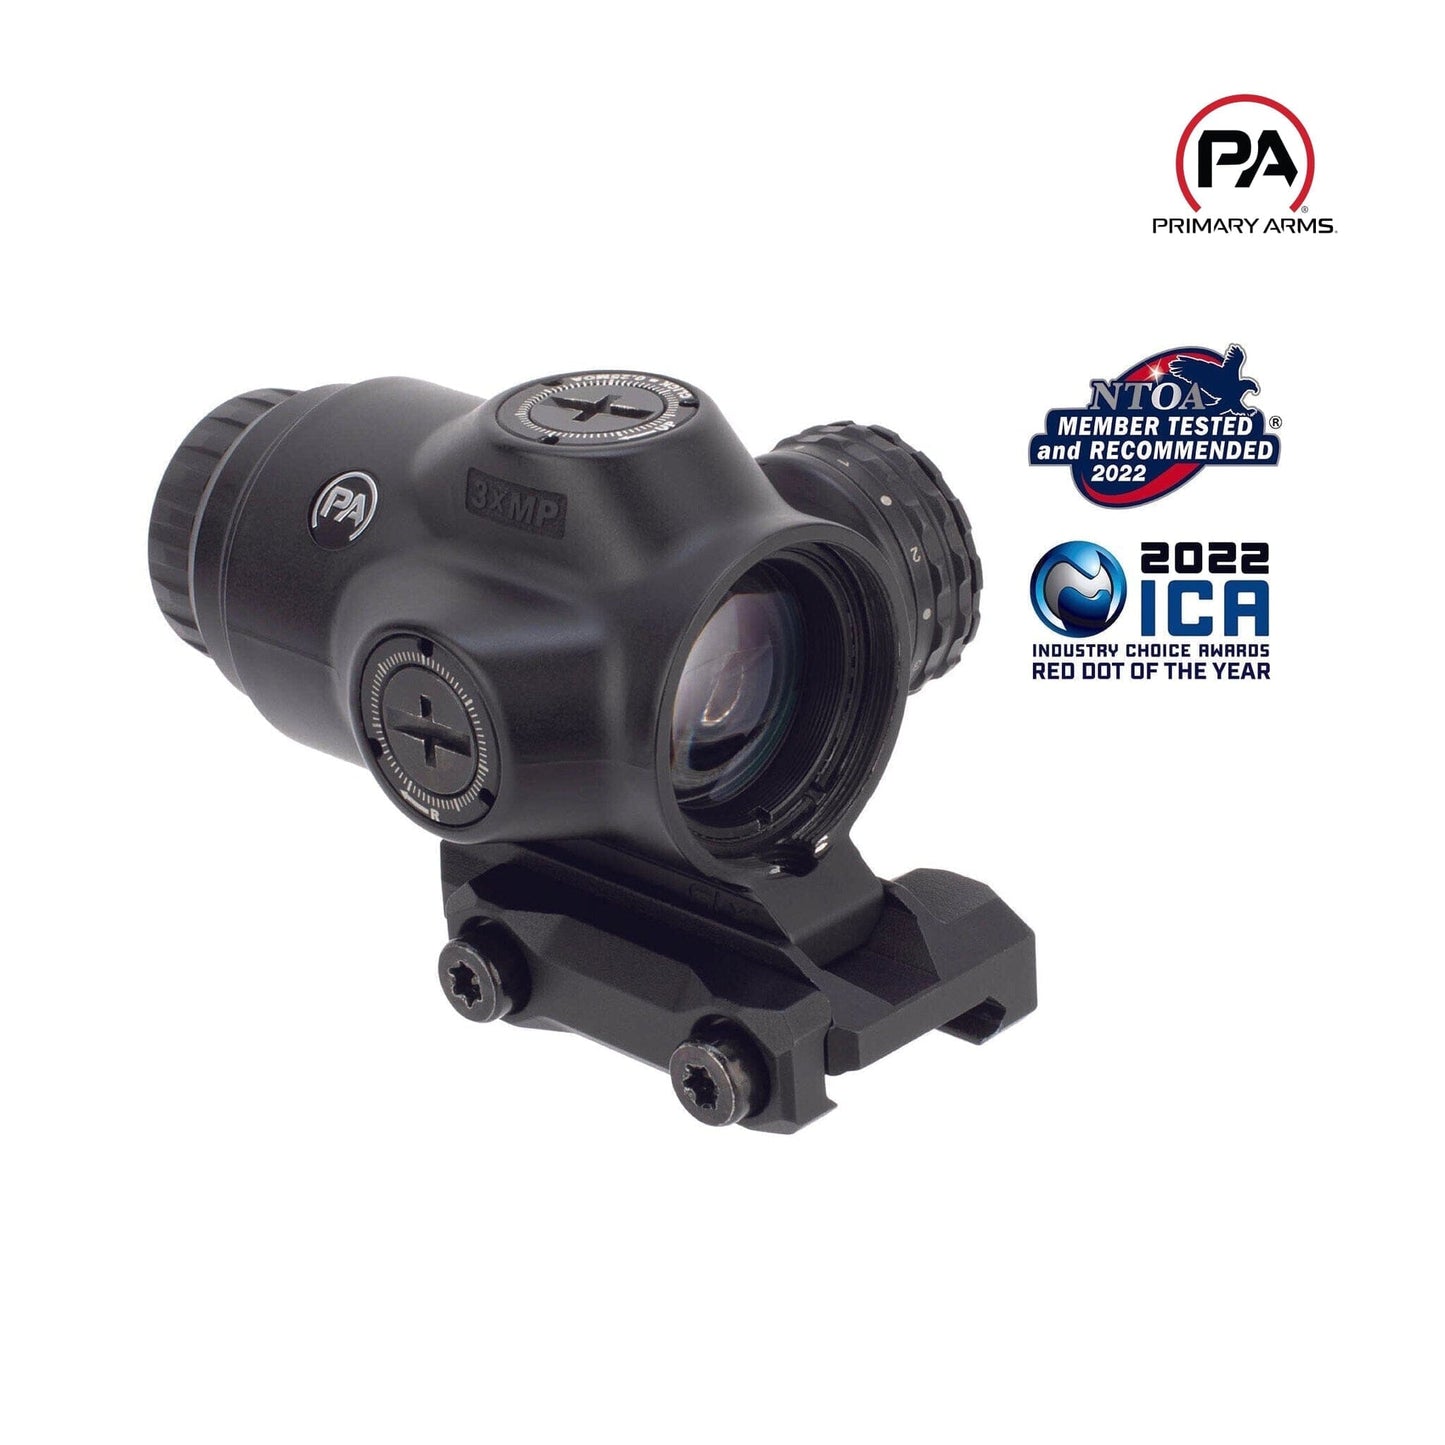 Primary Arms SLx 3x MicroPrism Sight - Red ACSS Raptor 5.56/.308 - Yard Reticle Prism Rifle Scope Primary Arms 